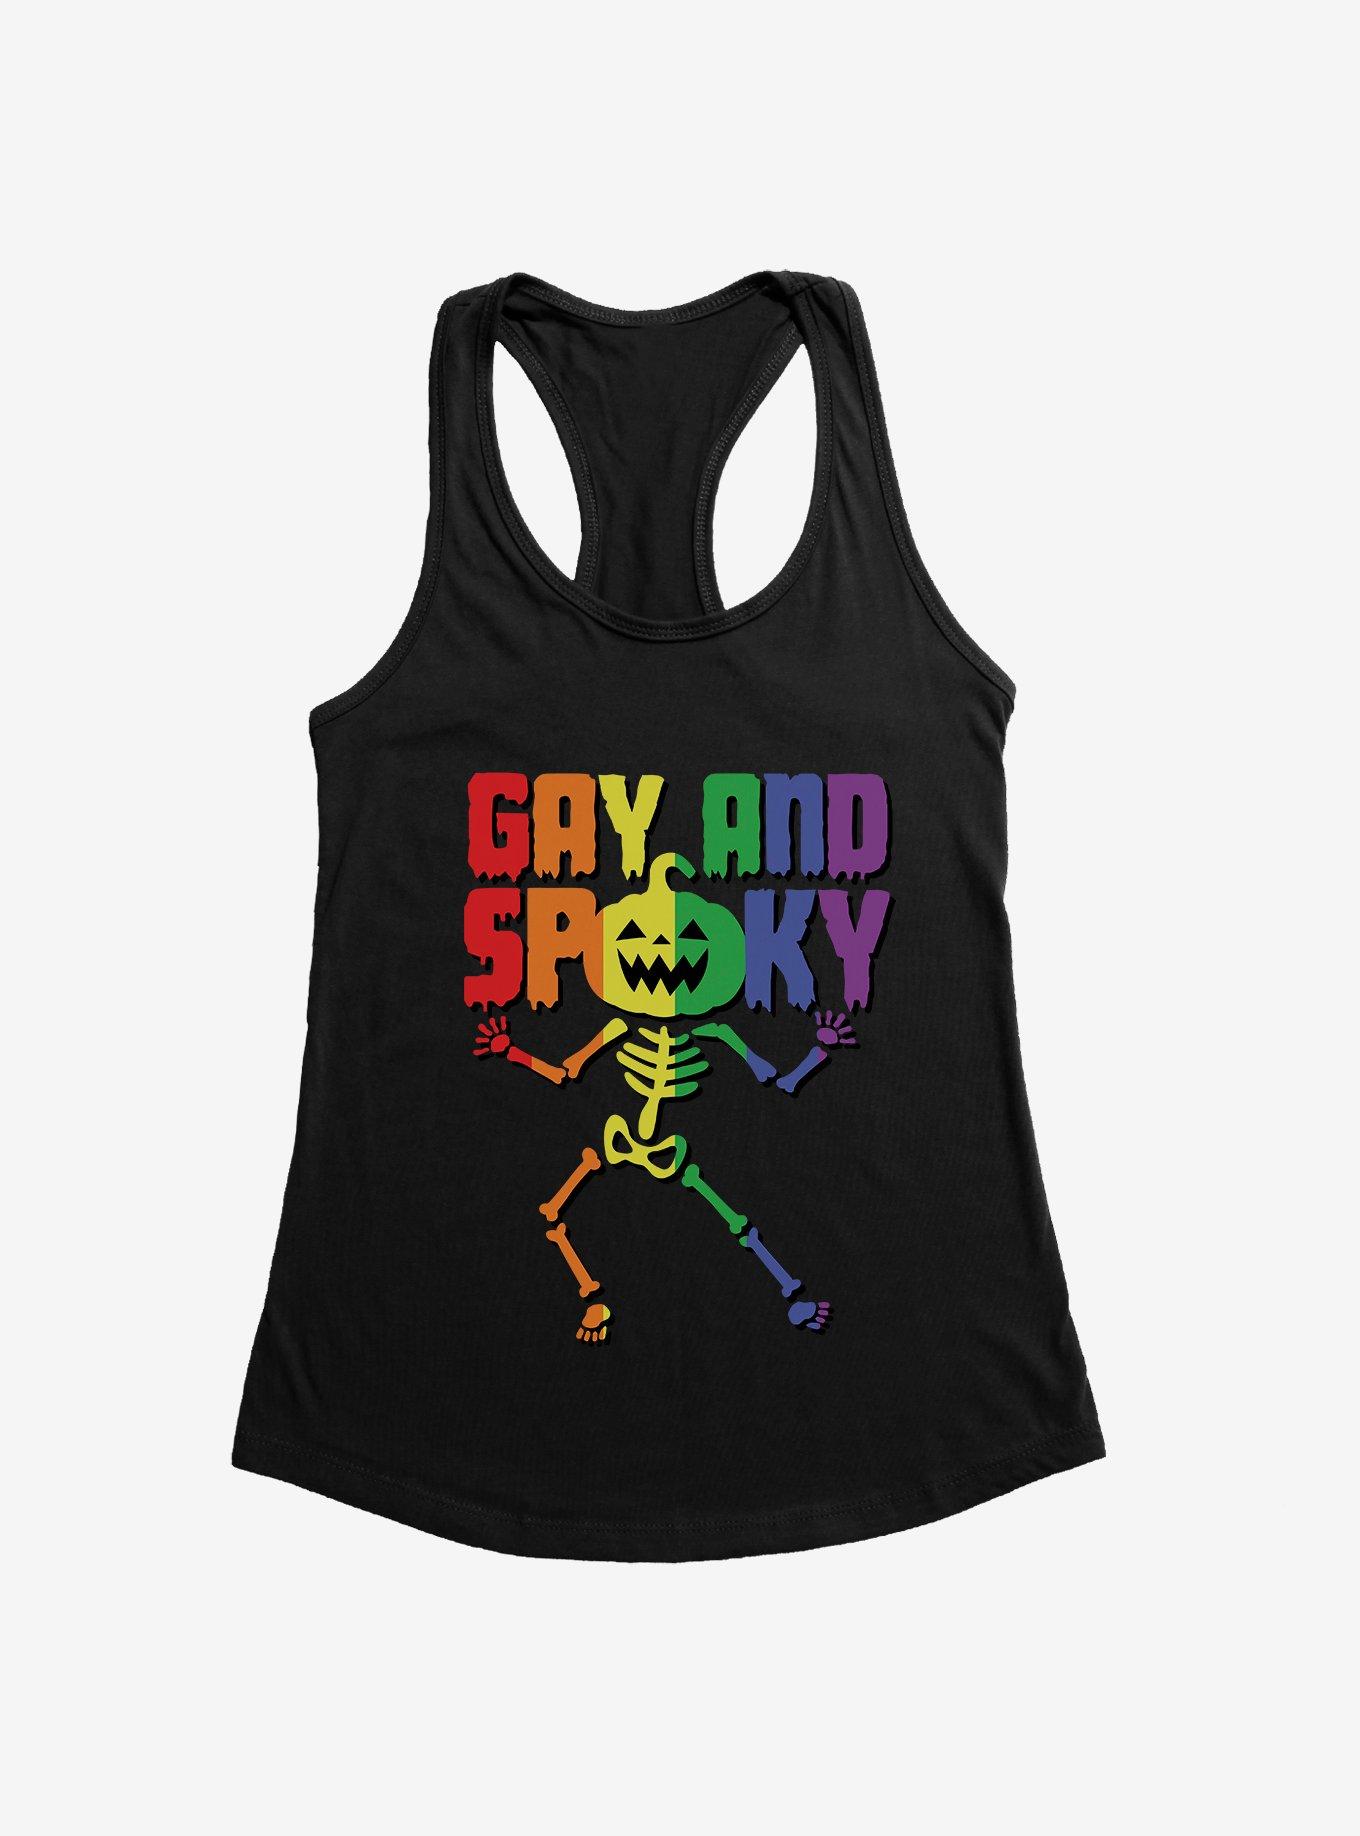 Hot Topic Rainbow Gay And Spooky Skeleton Girls Tank